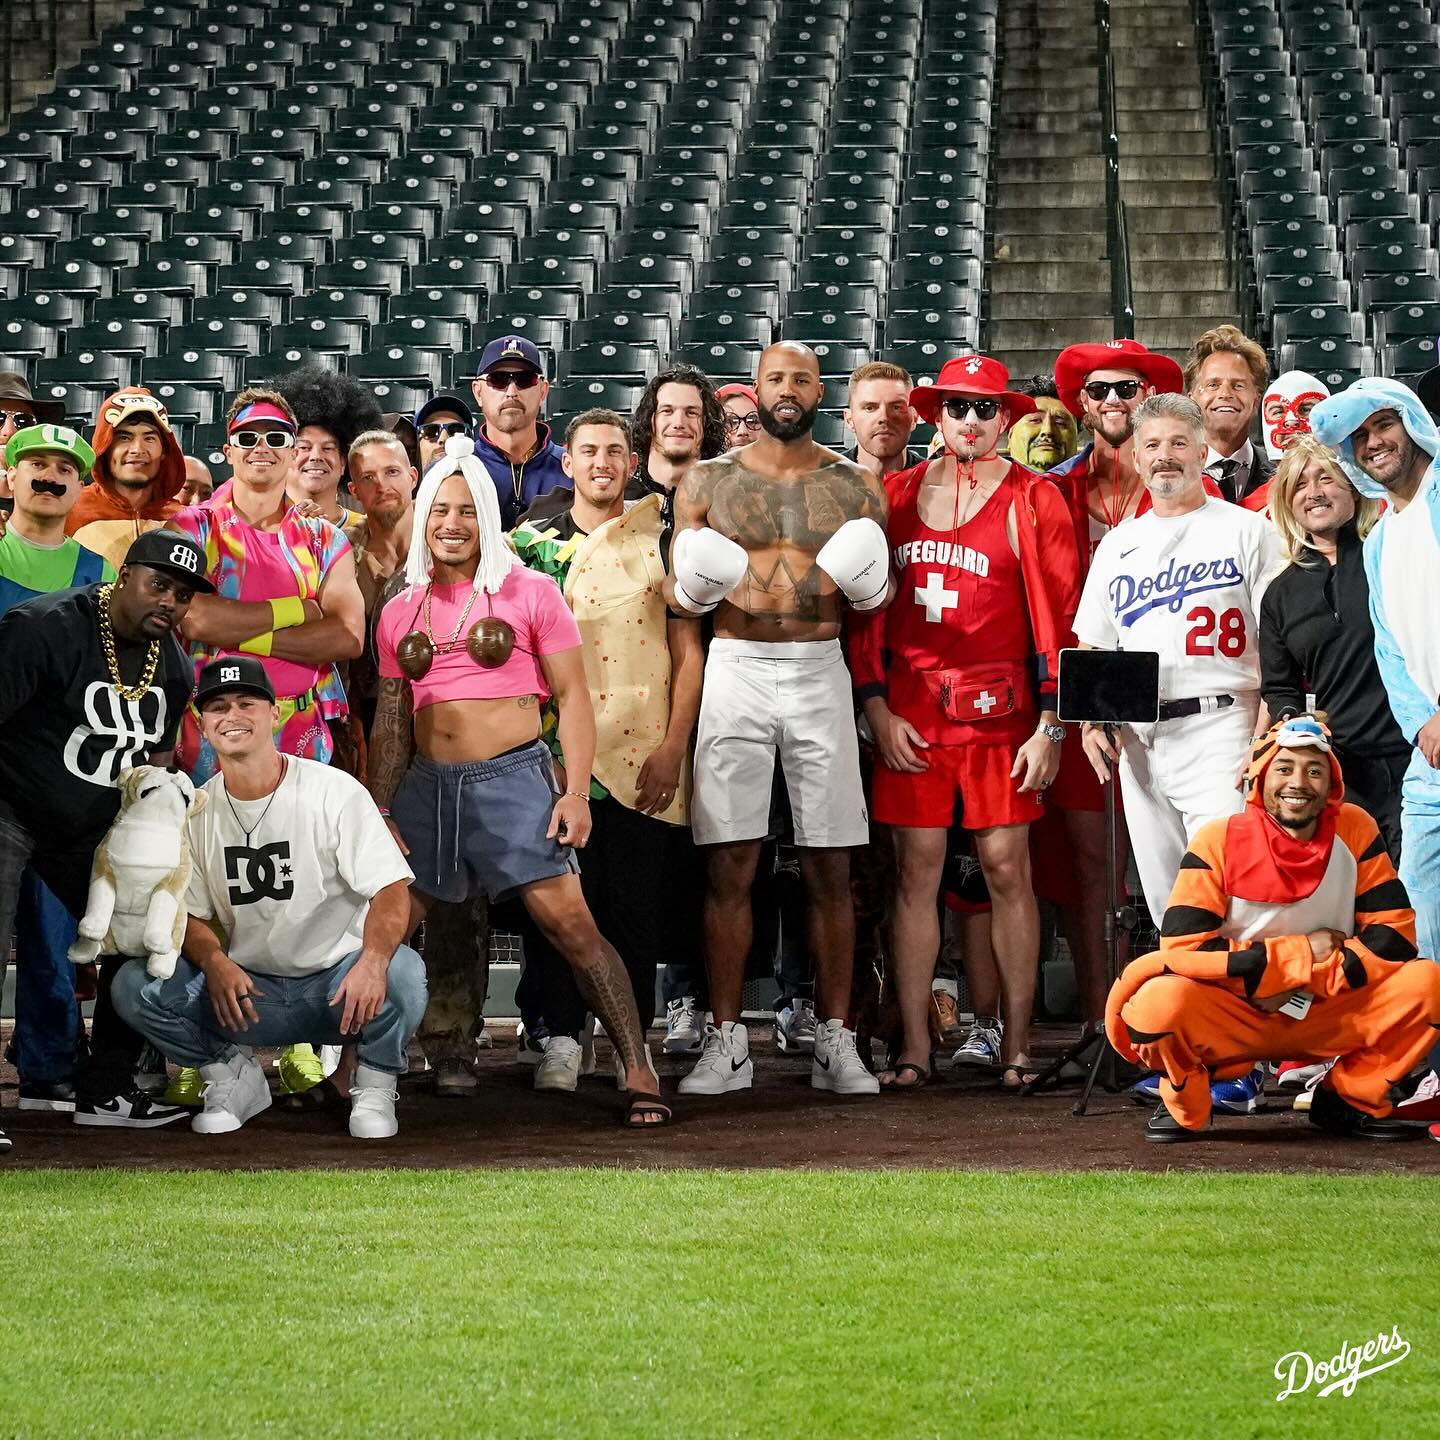 Most of the team with their hilarious costumes : r/Dodgers